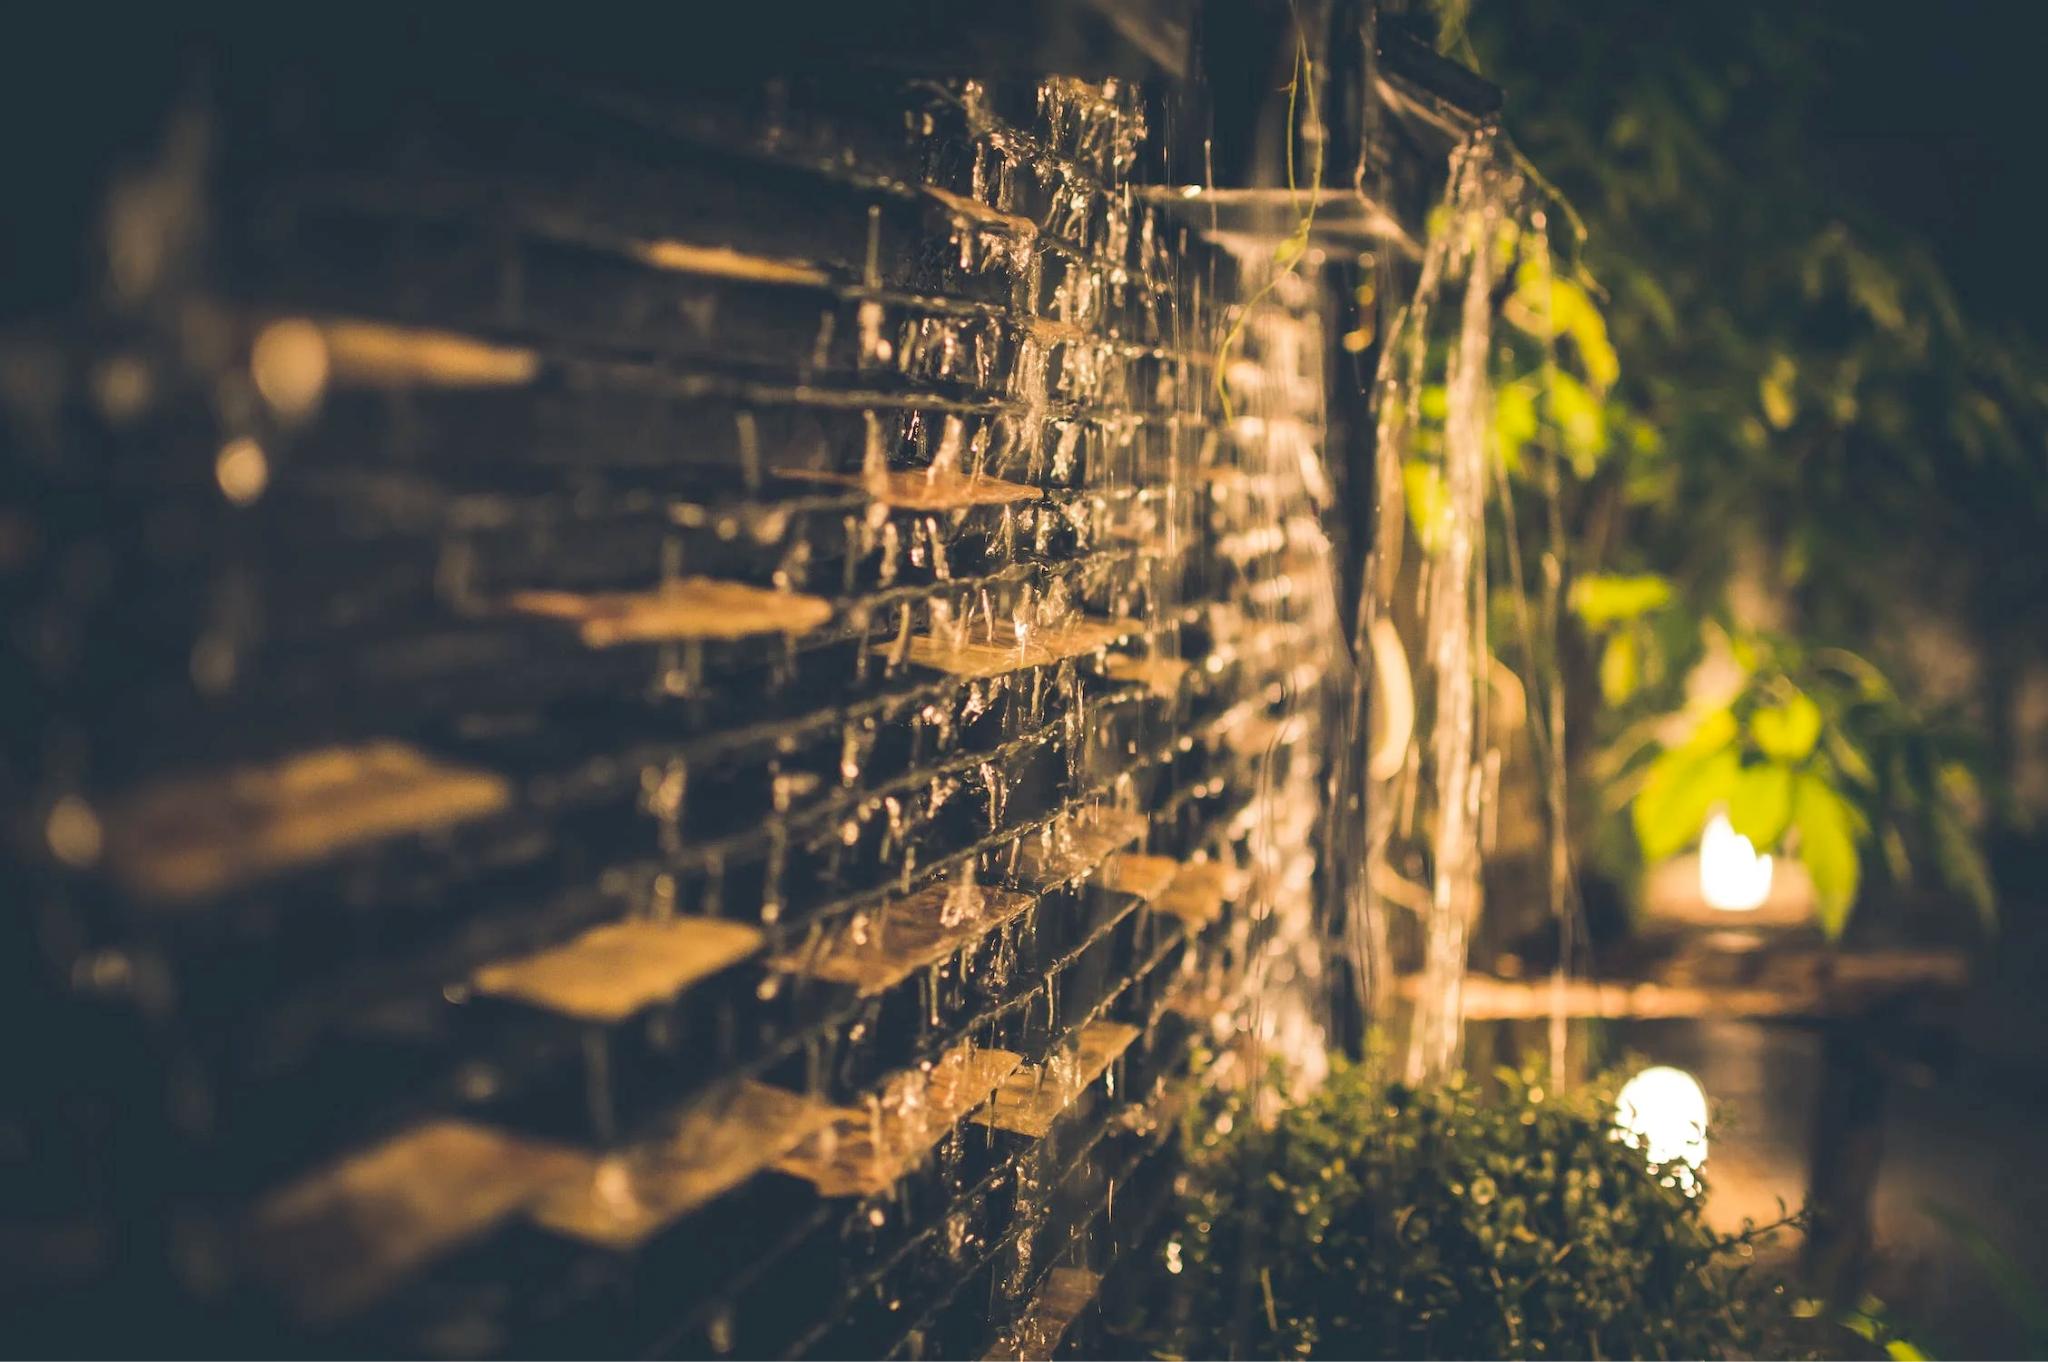 An image of outdoor lighting highlighting a water wall in the garden